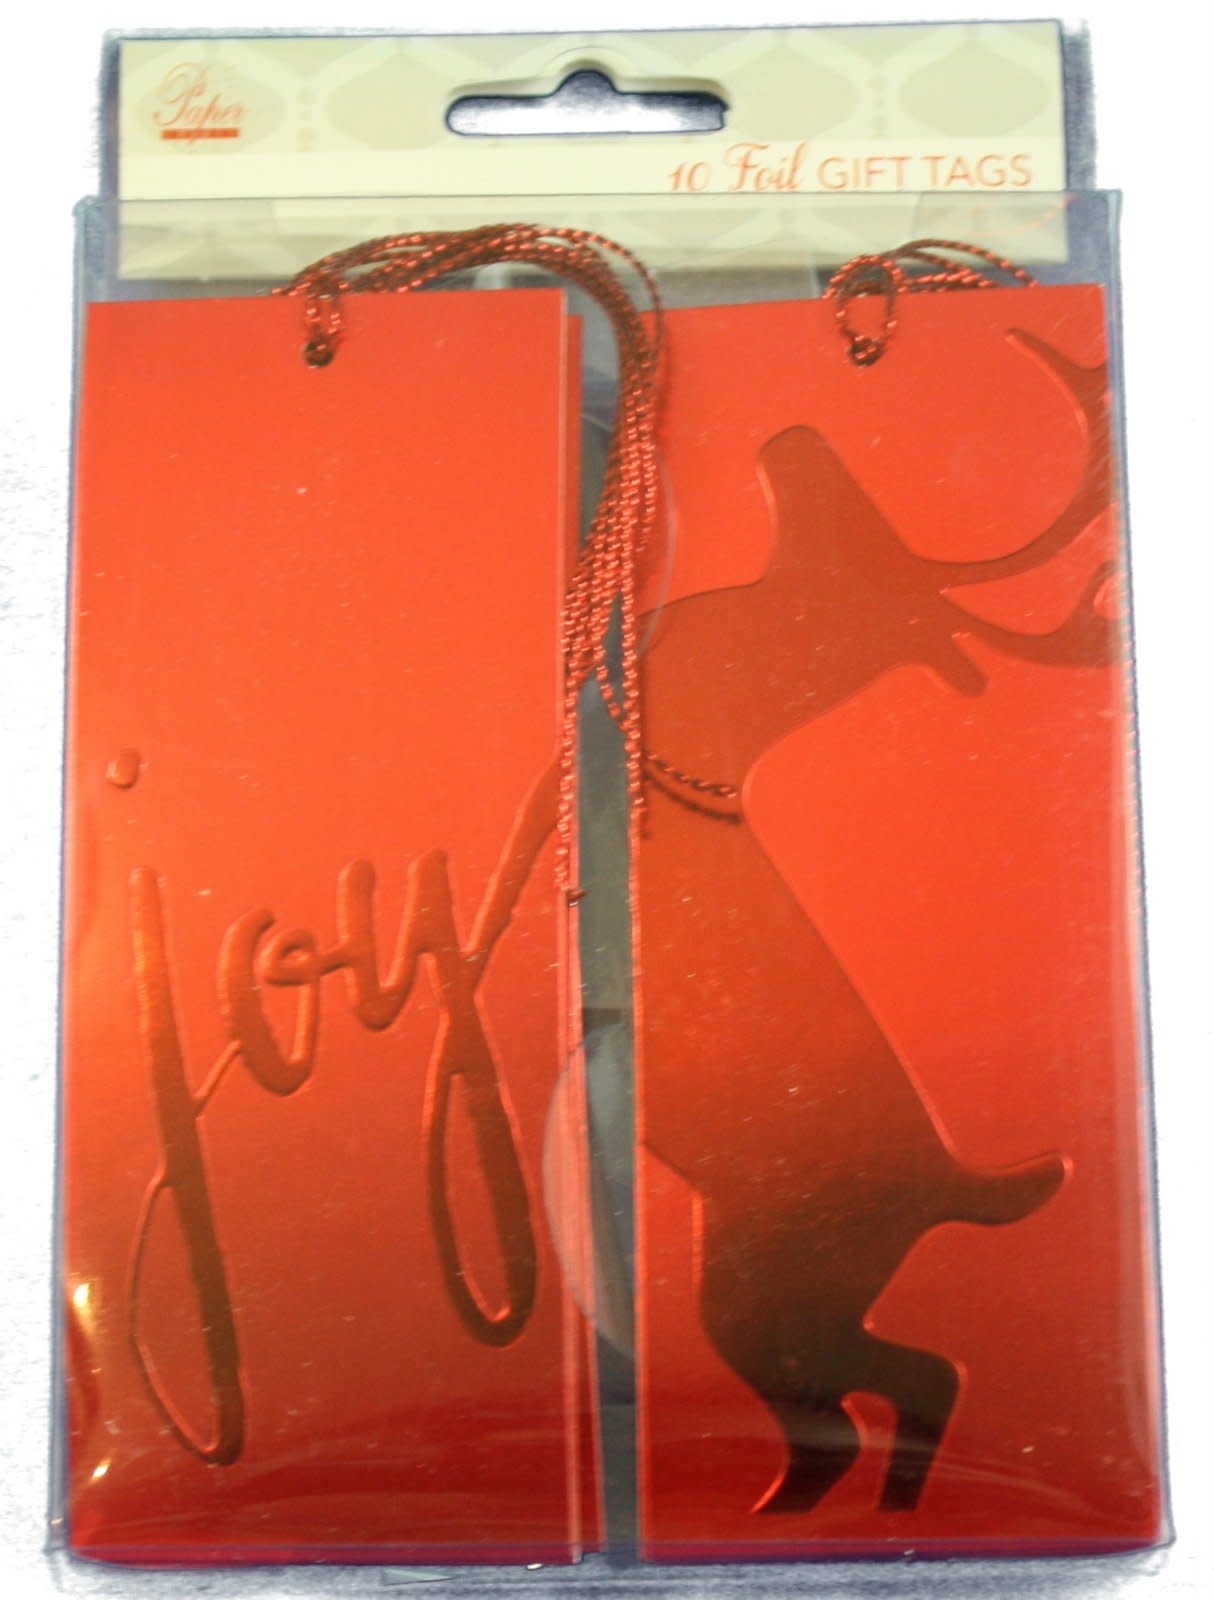 Foil Embossed Tie Gift Tags 10 Pack - - Shelburne Country Store